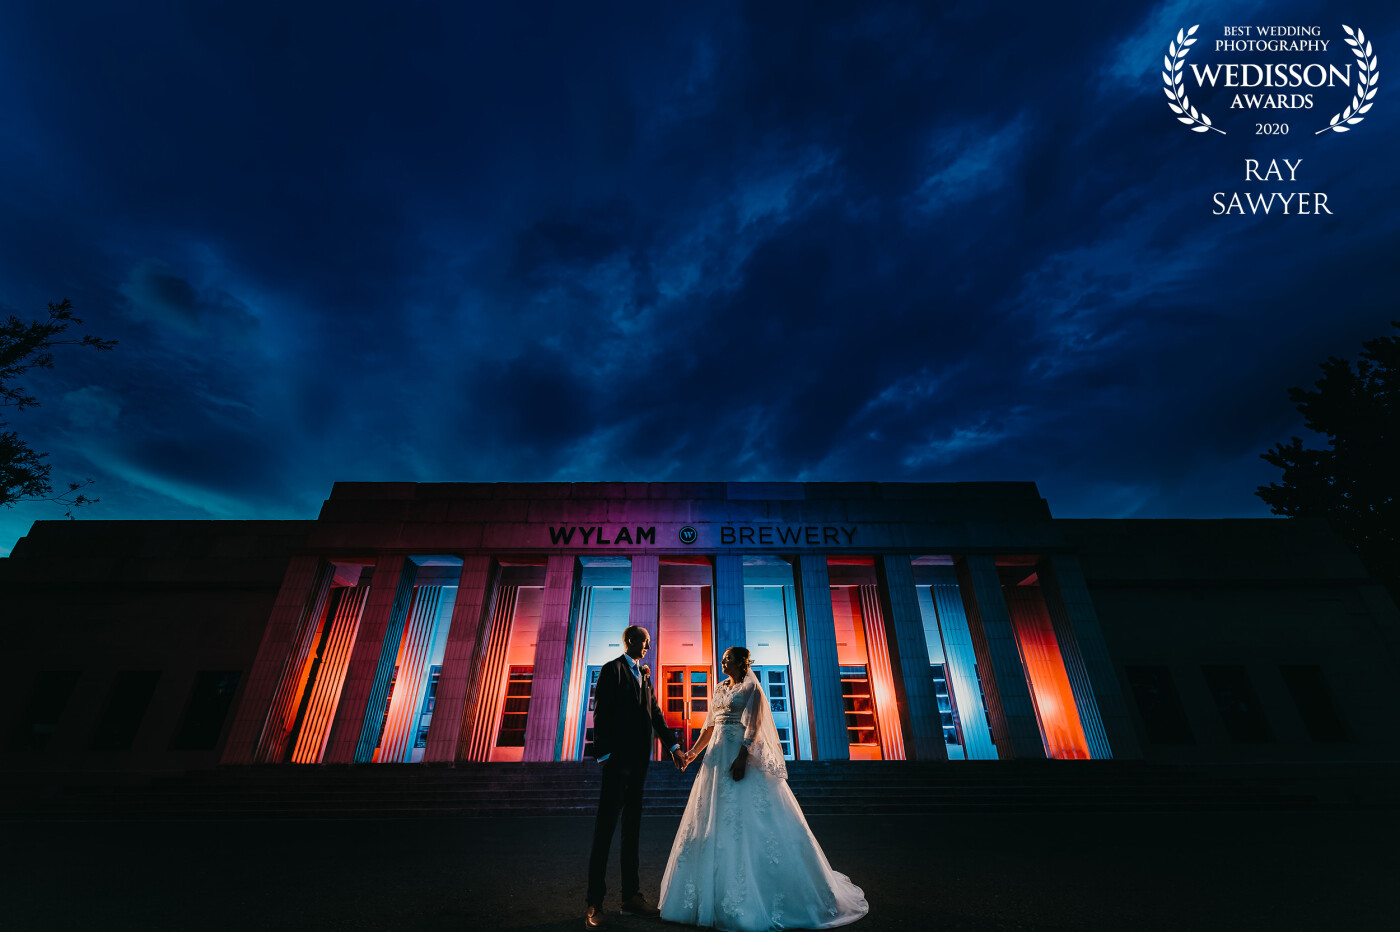 Captured at the stunning Wylam Brewery. This was captured about an hour before sunset and involved multiple flashes and colored gels to light the columns as well as a key light and rim lights for the couple. A very complex photograph to create but I hope you agree it looks awesome.